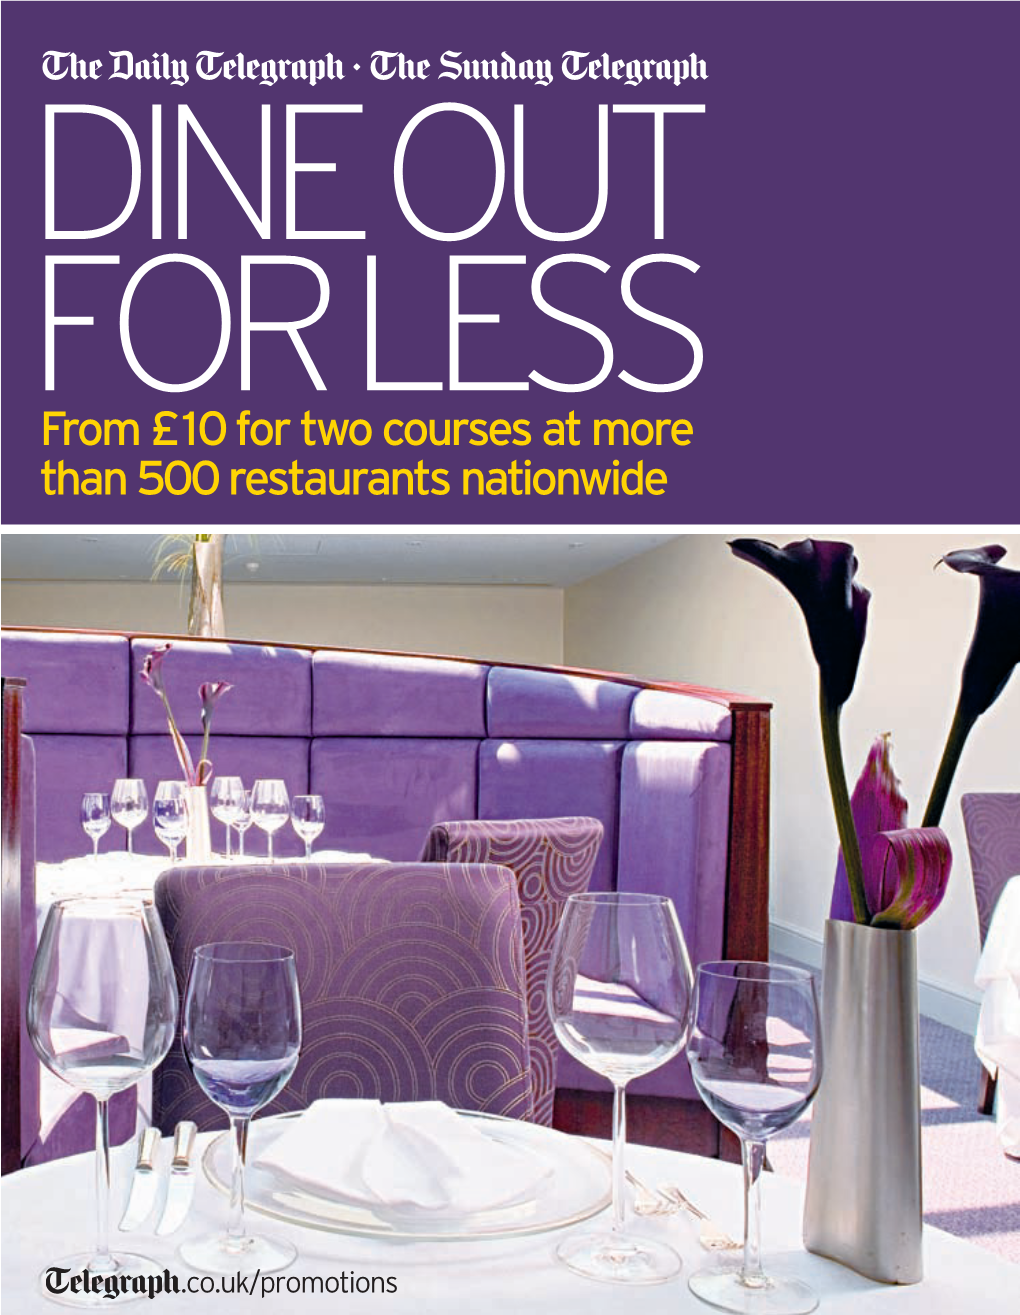 From £10 for Two Courses at More Than 500 Restaurants Nationwide